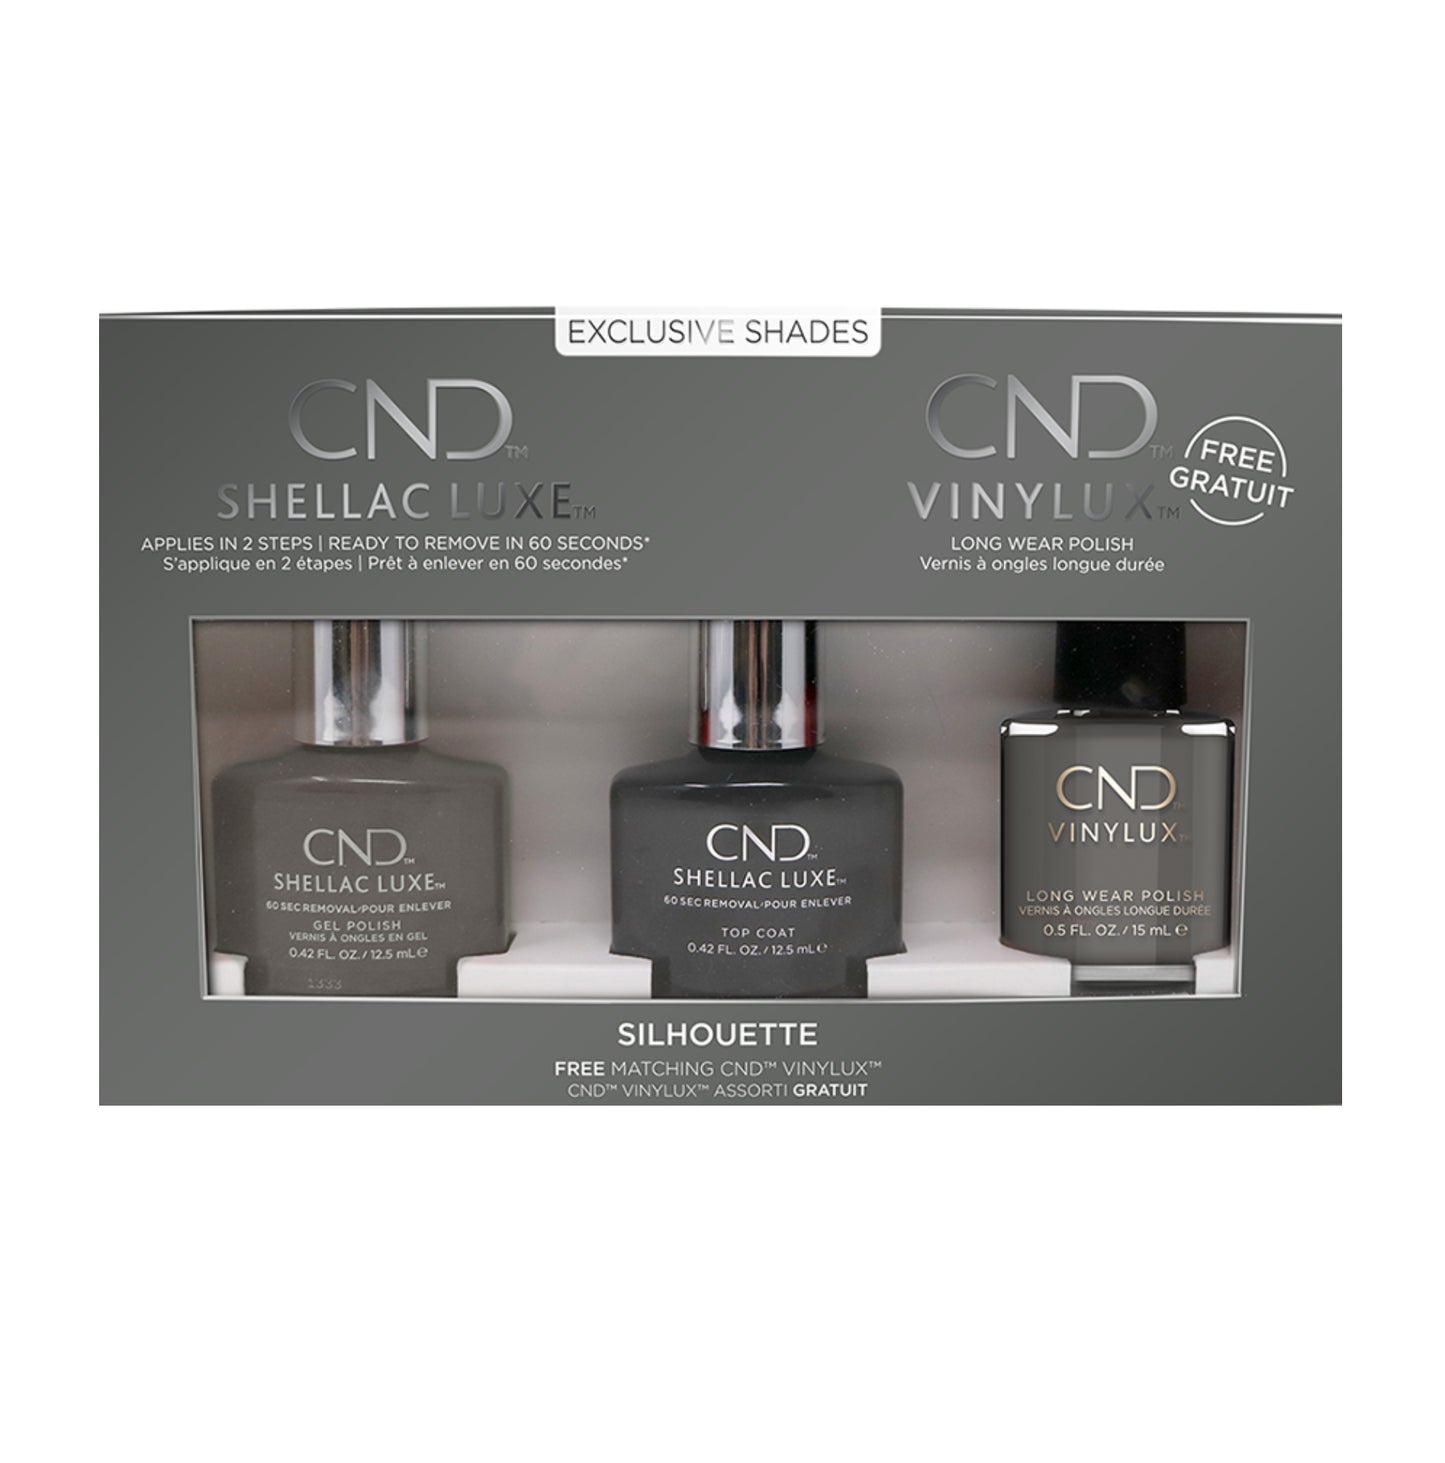 Shellac Luxe & Vinylux Giftset - Silhouette